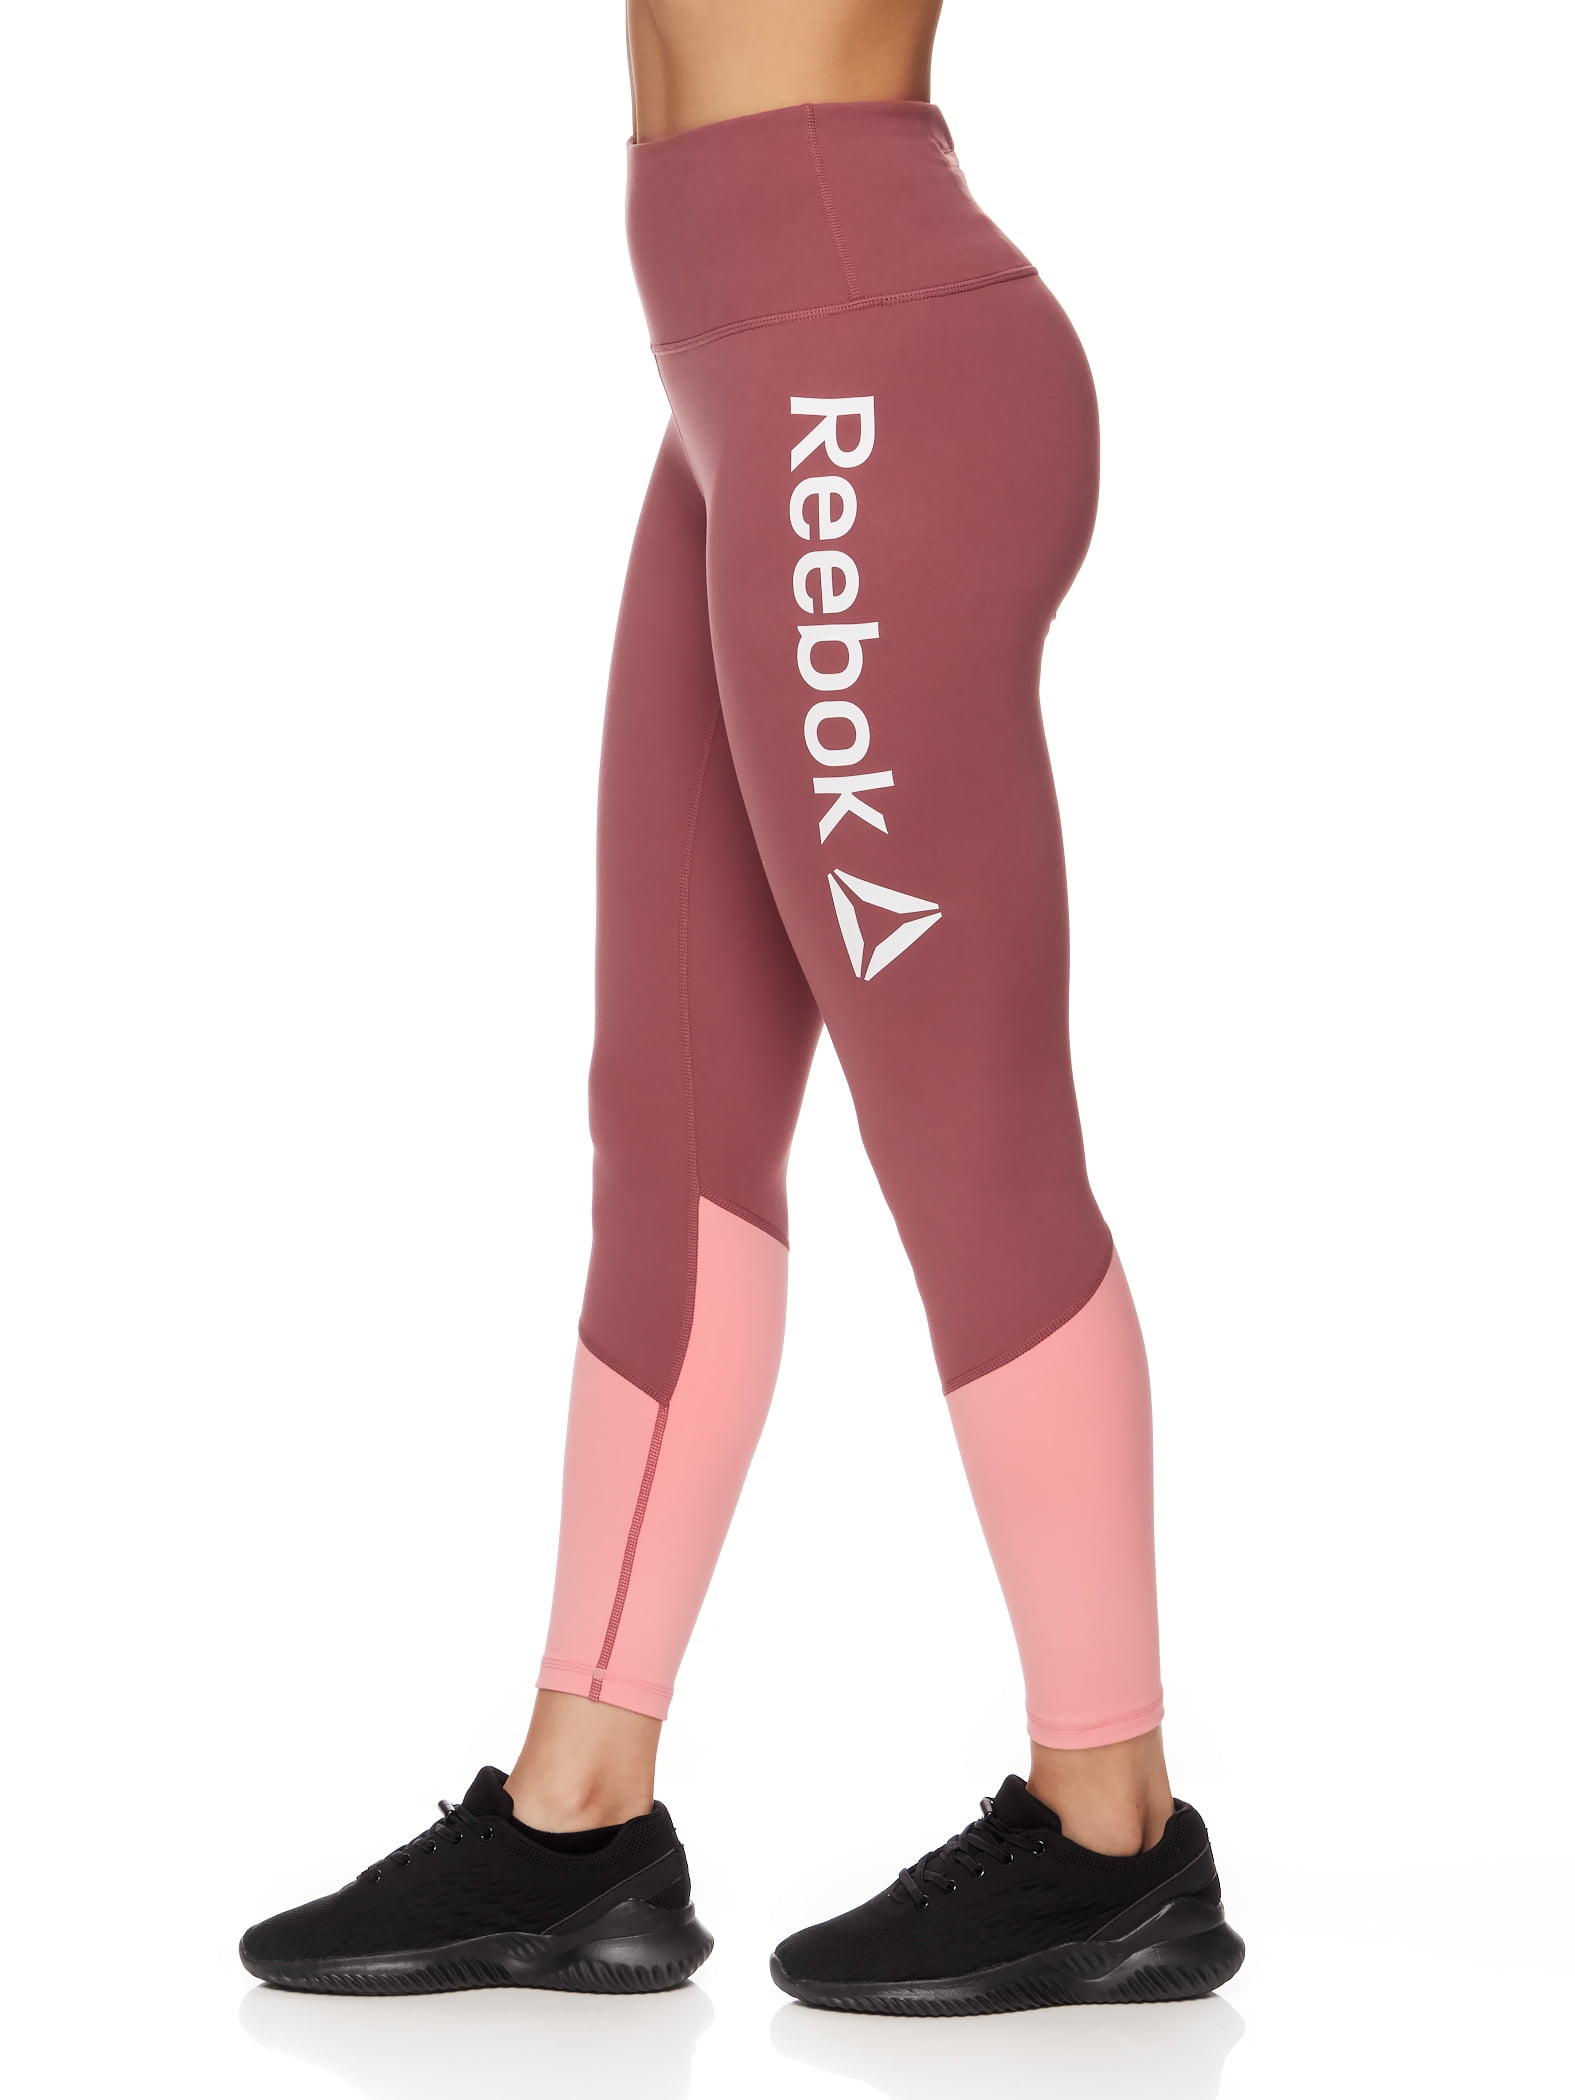 Reebok Women's Everyday Highrise 7/8 Legging with 25 Inseam and